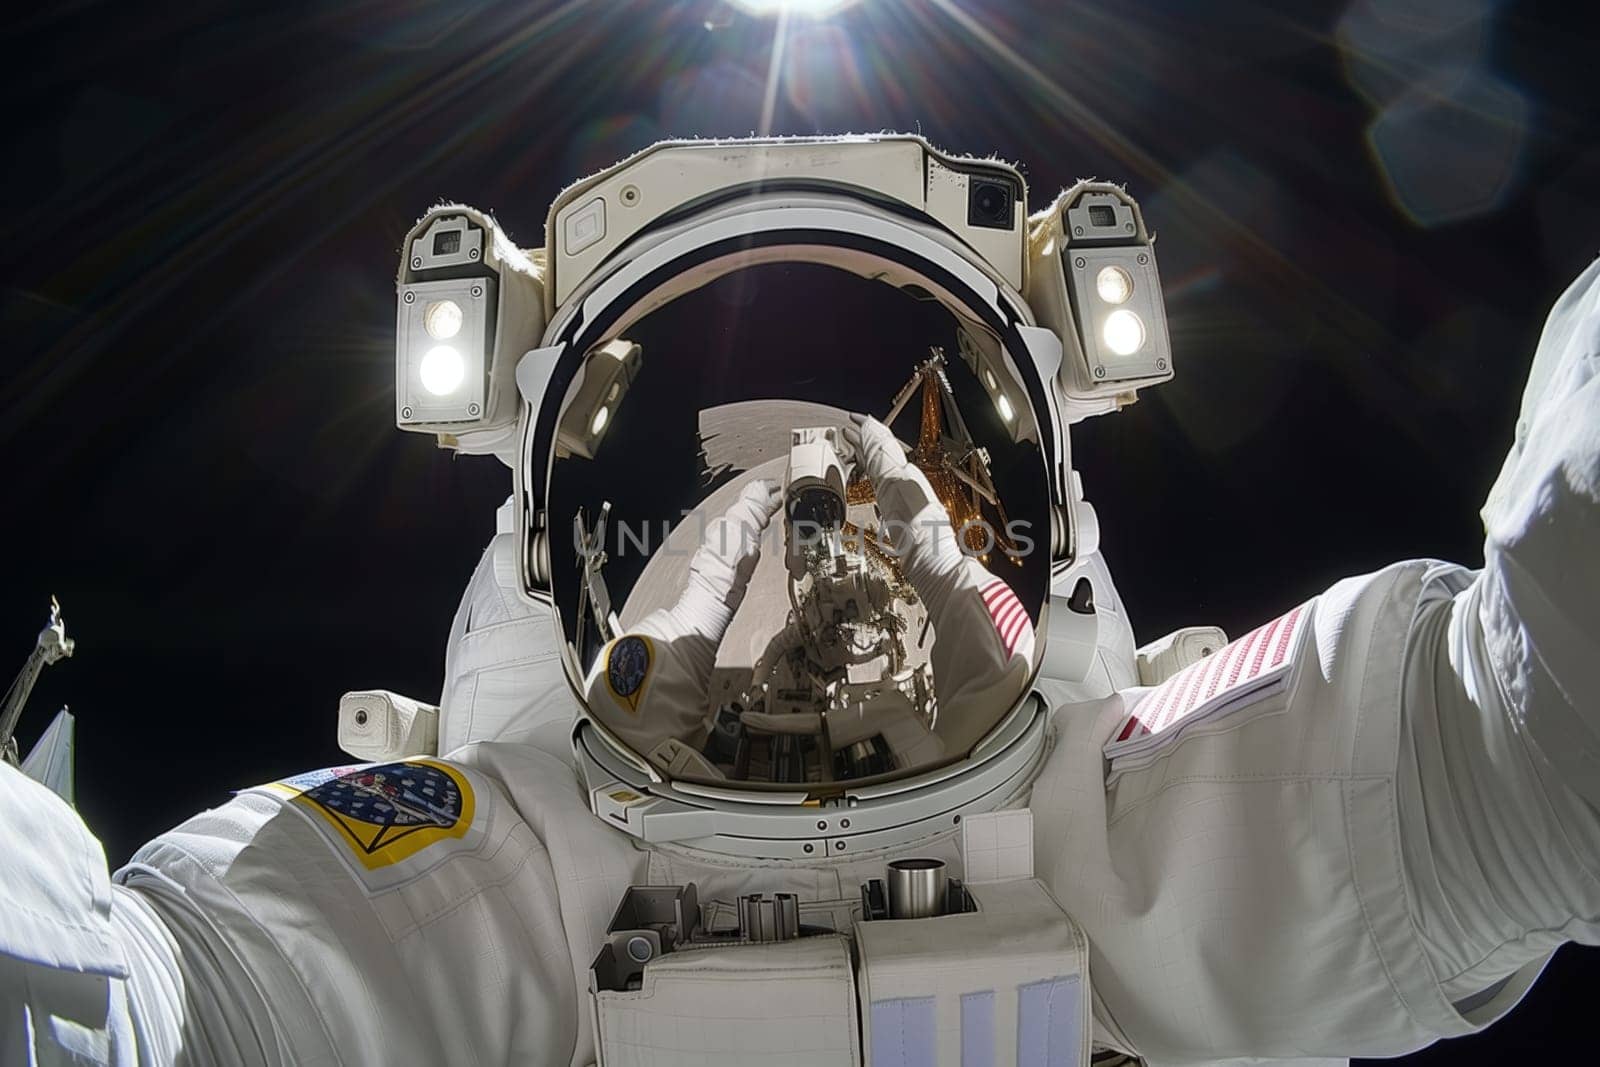 An astronaut wearing a helmet and personal protective equipment in space takes a selfie, capturing a fascinating event blending science with fiction